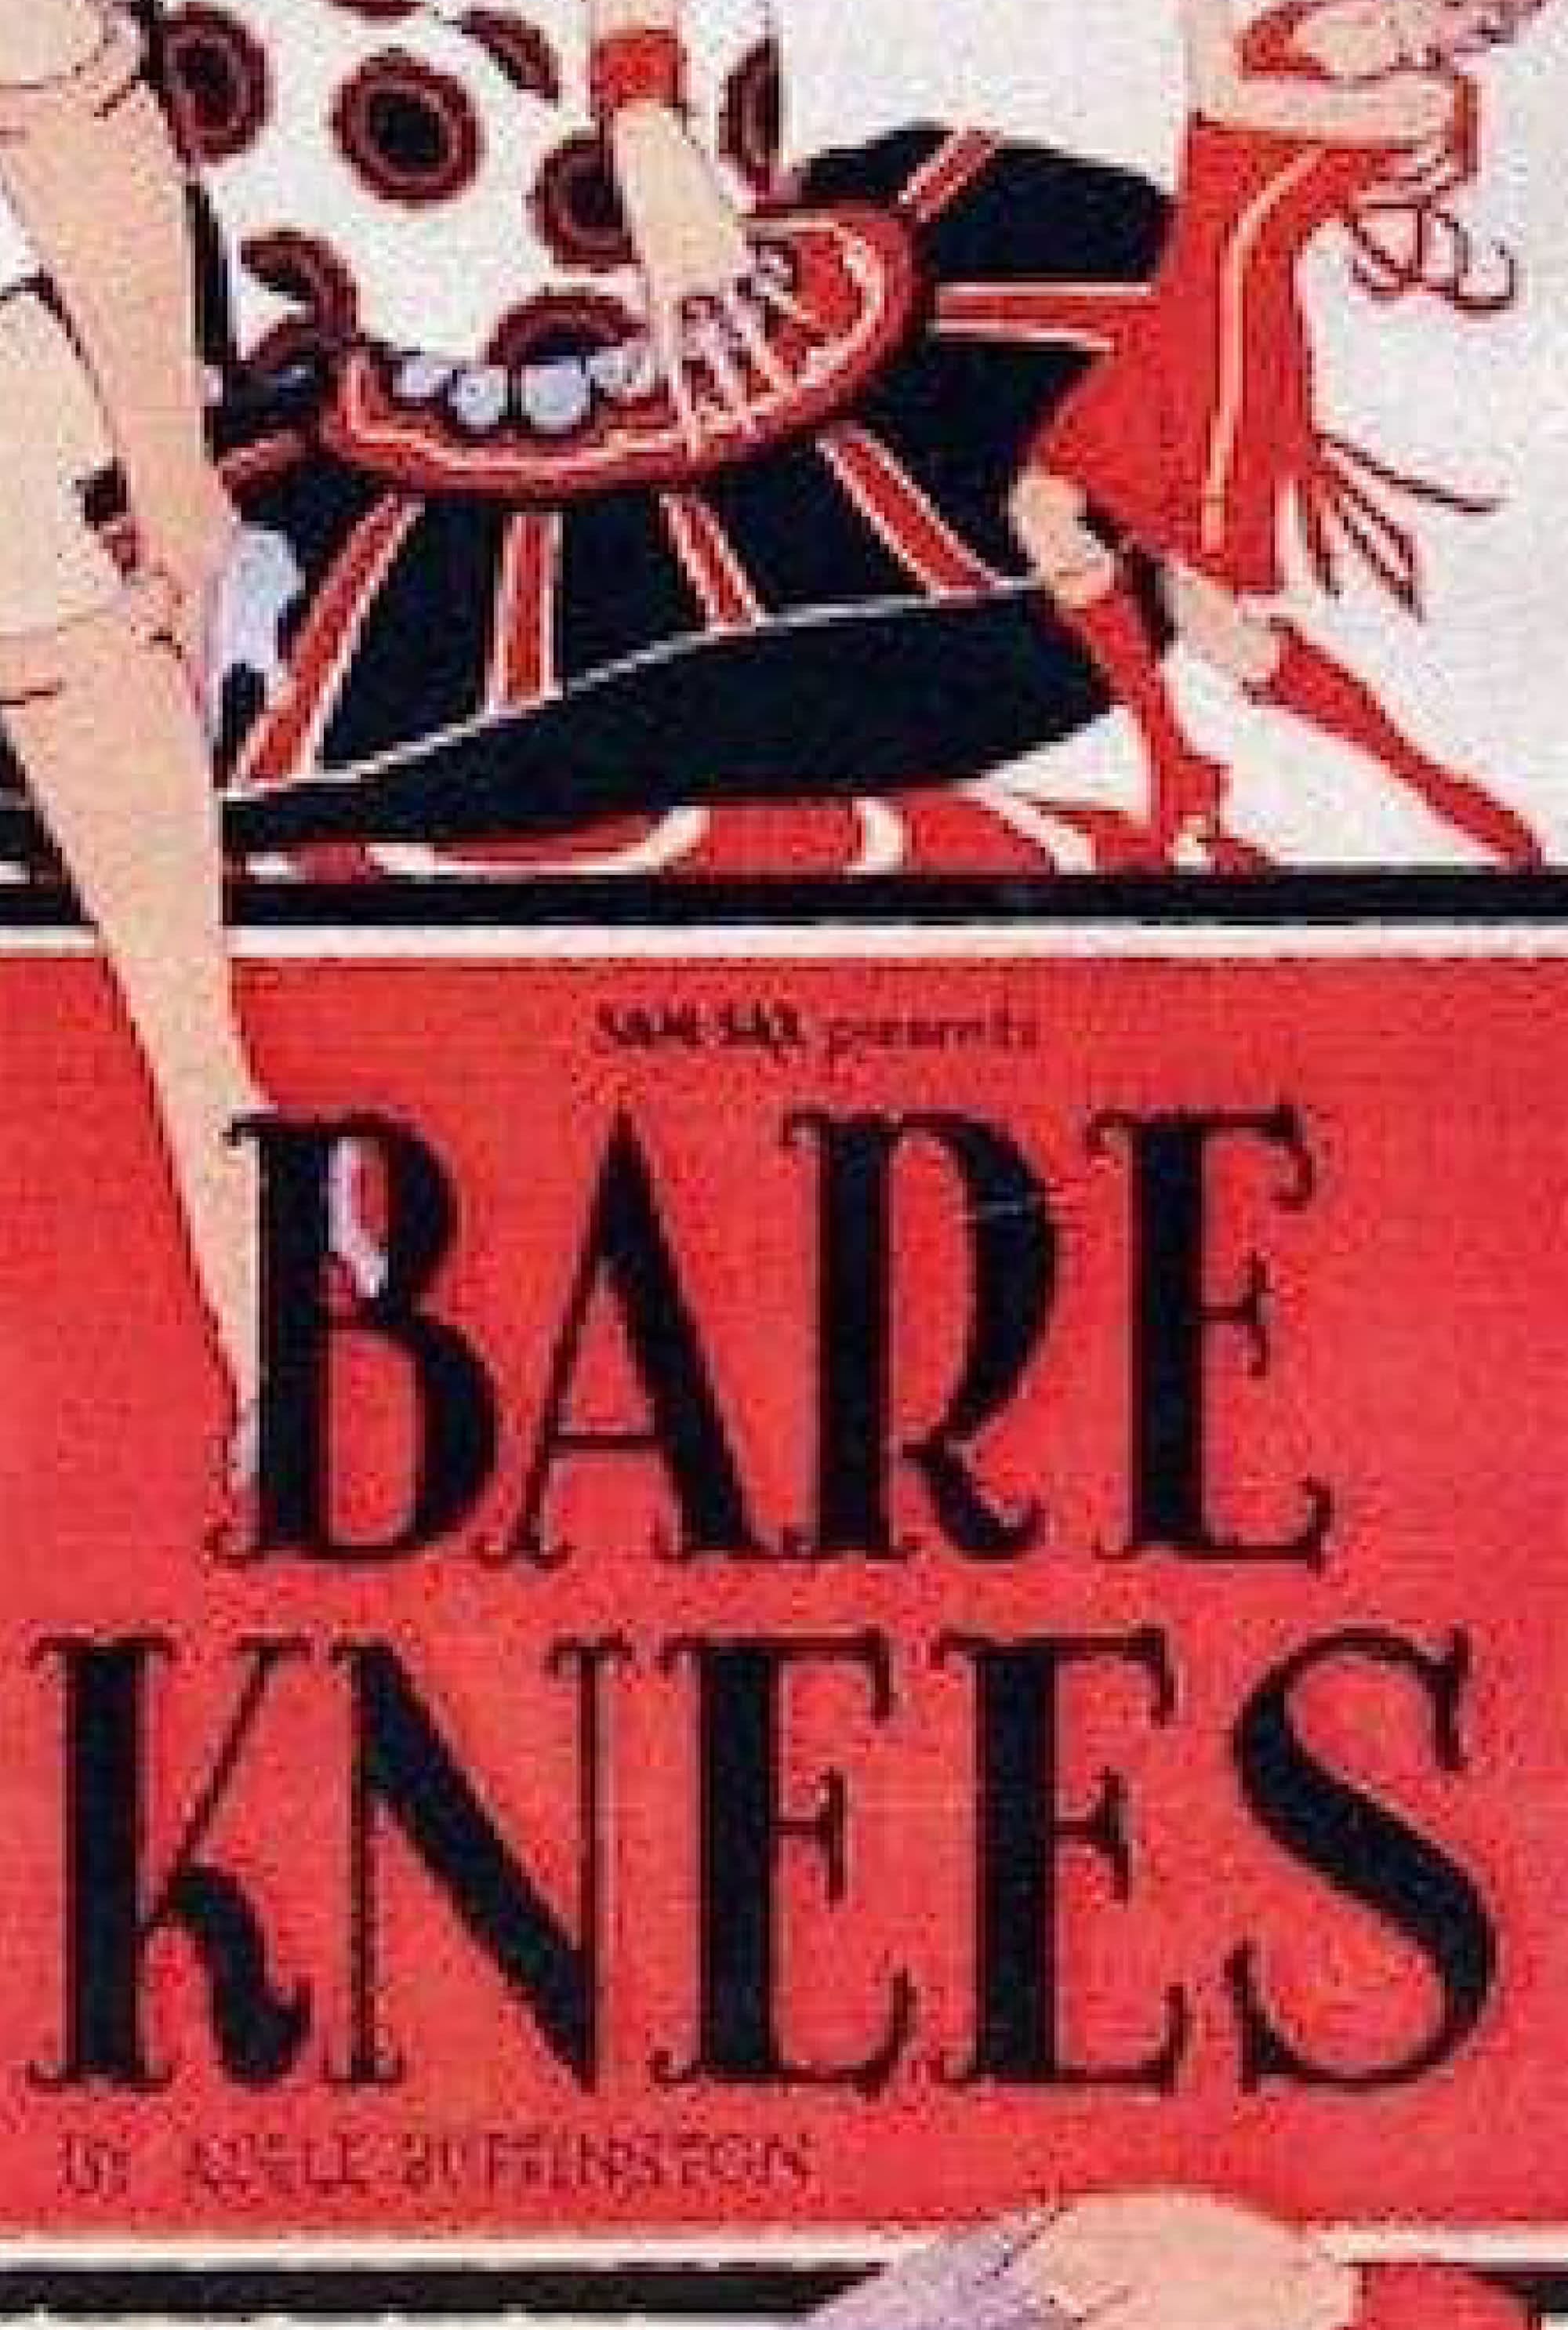 Atlas Presents: Sounds of Silence Film Series: Bare Knees - 1928